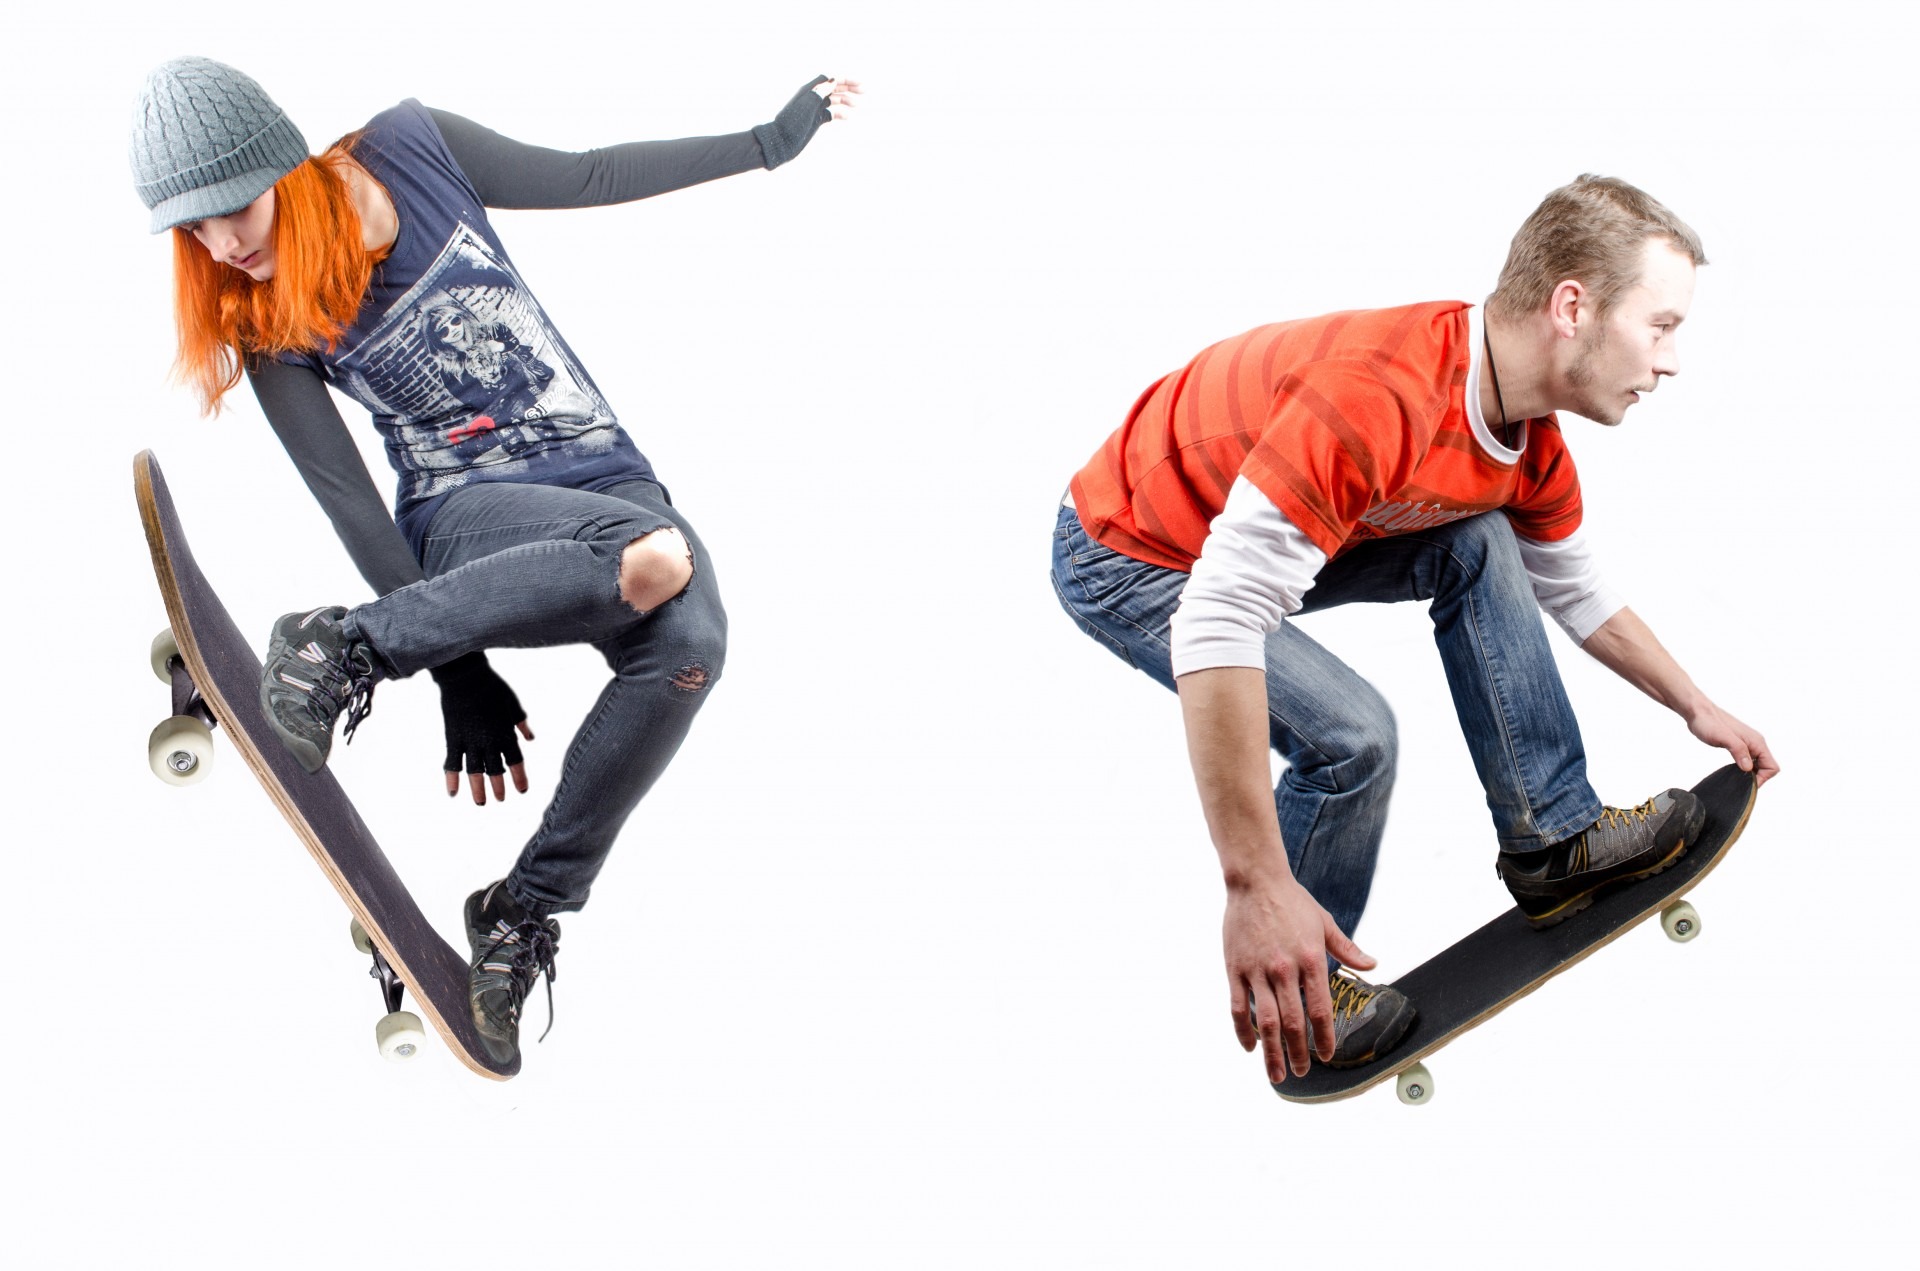 Female and male skateboarders jumping